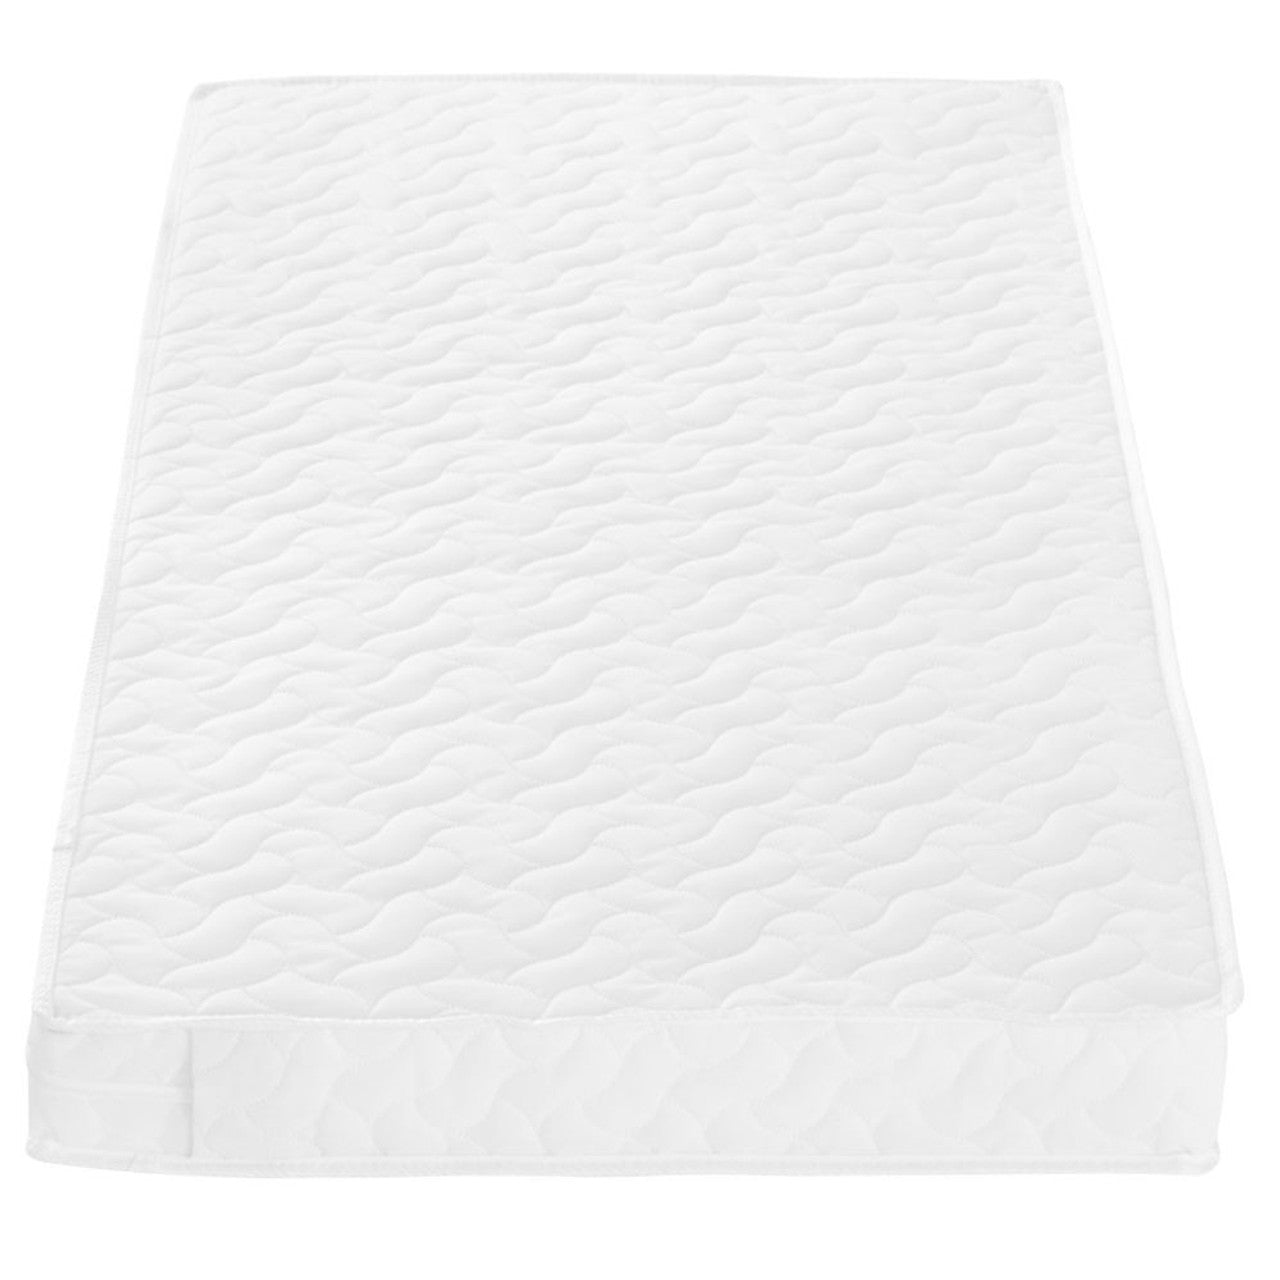 Tutti Bambini Pocket Sprung Cot Mattress (60 x 120 cm) -  | For Your Little One